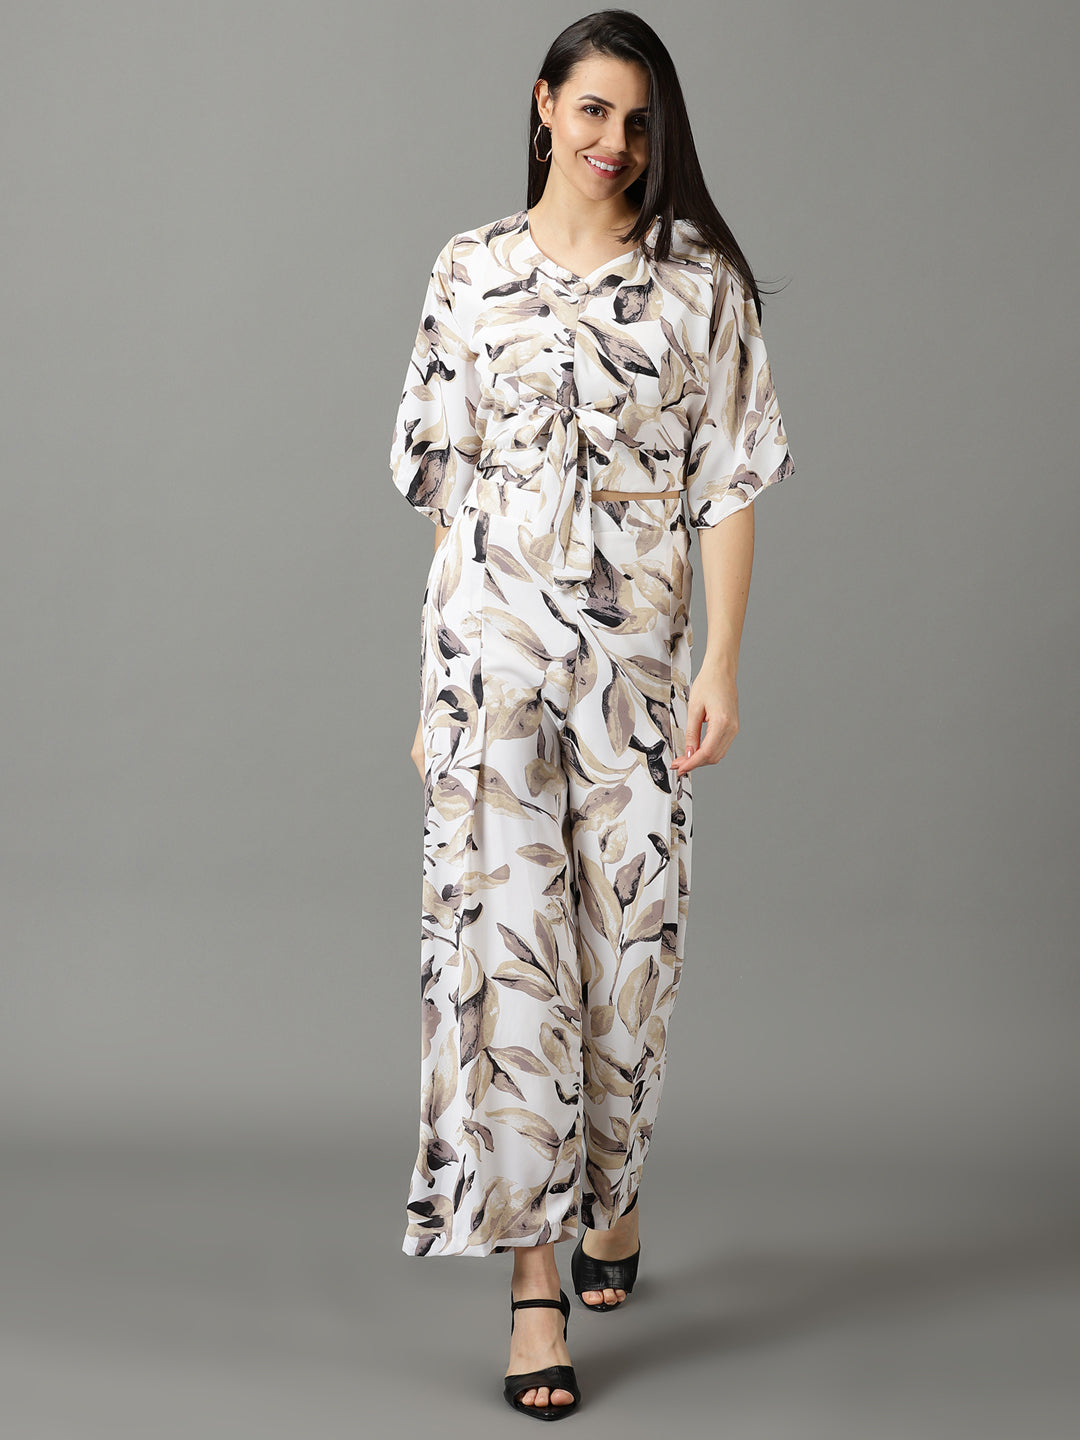 Women's White Printed Co-Ords